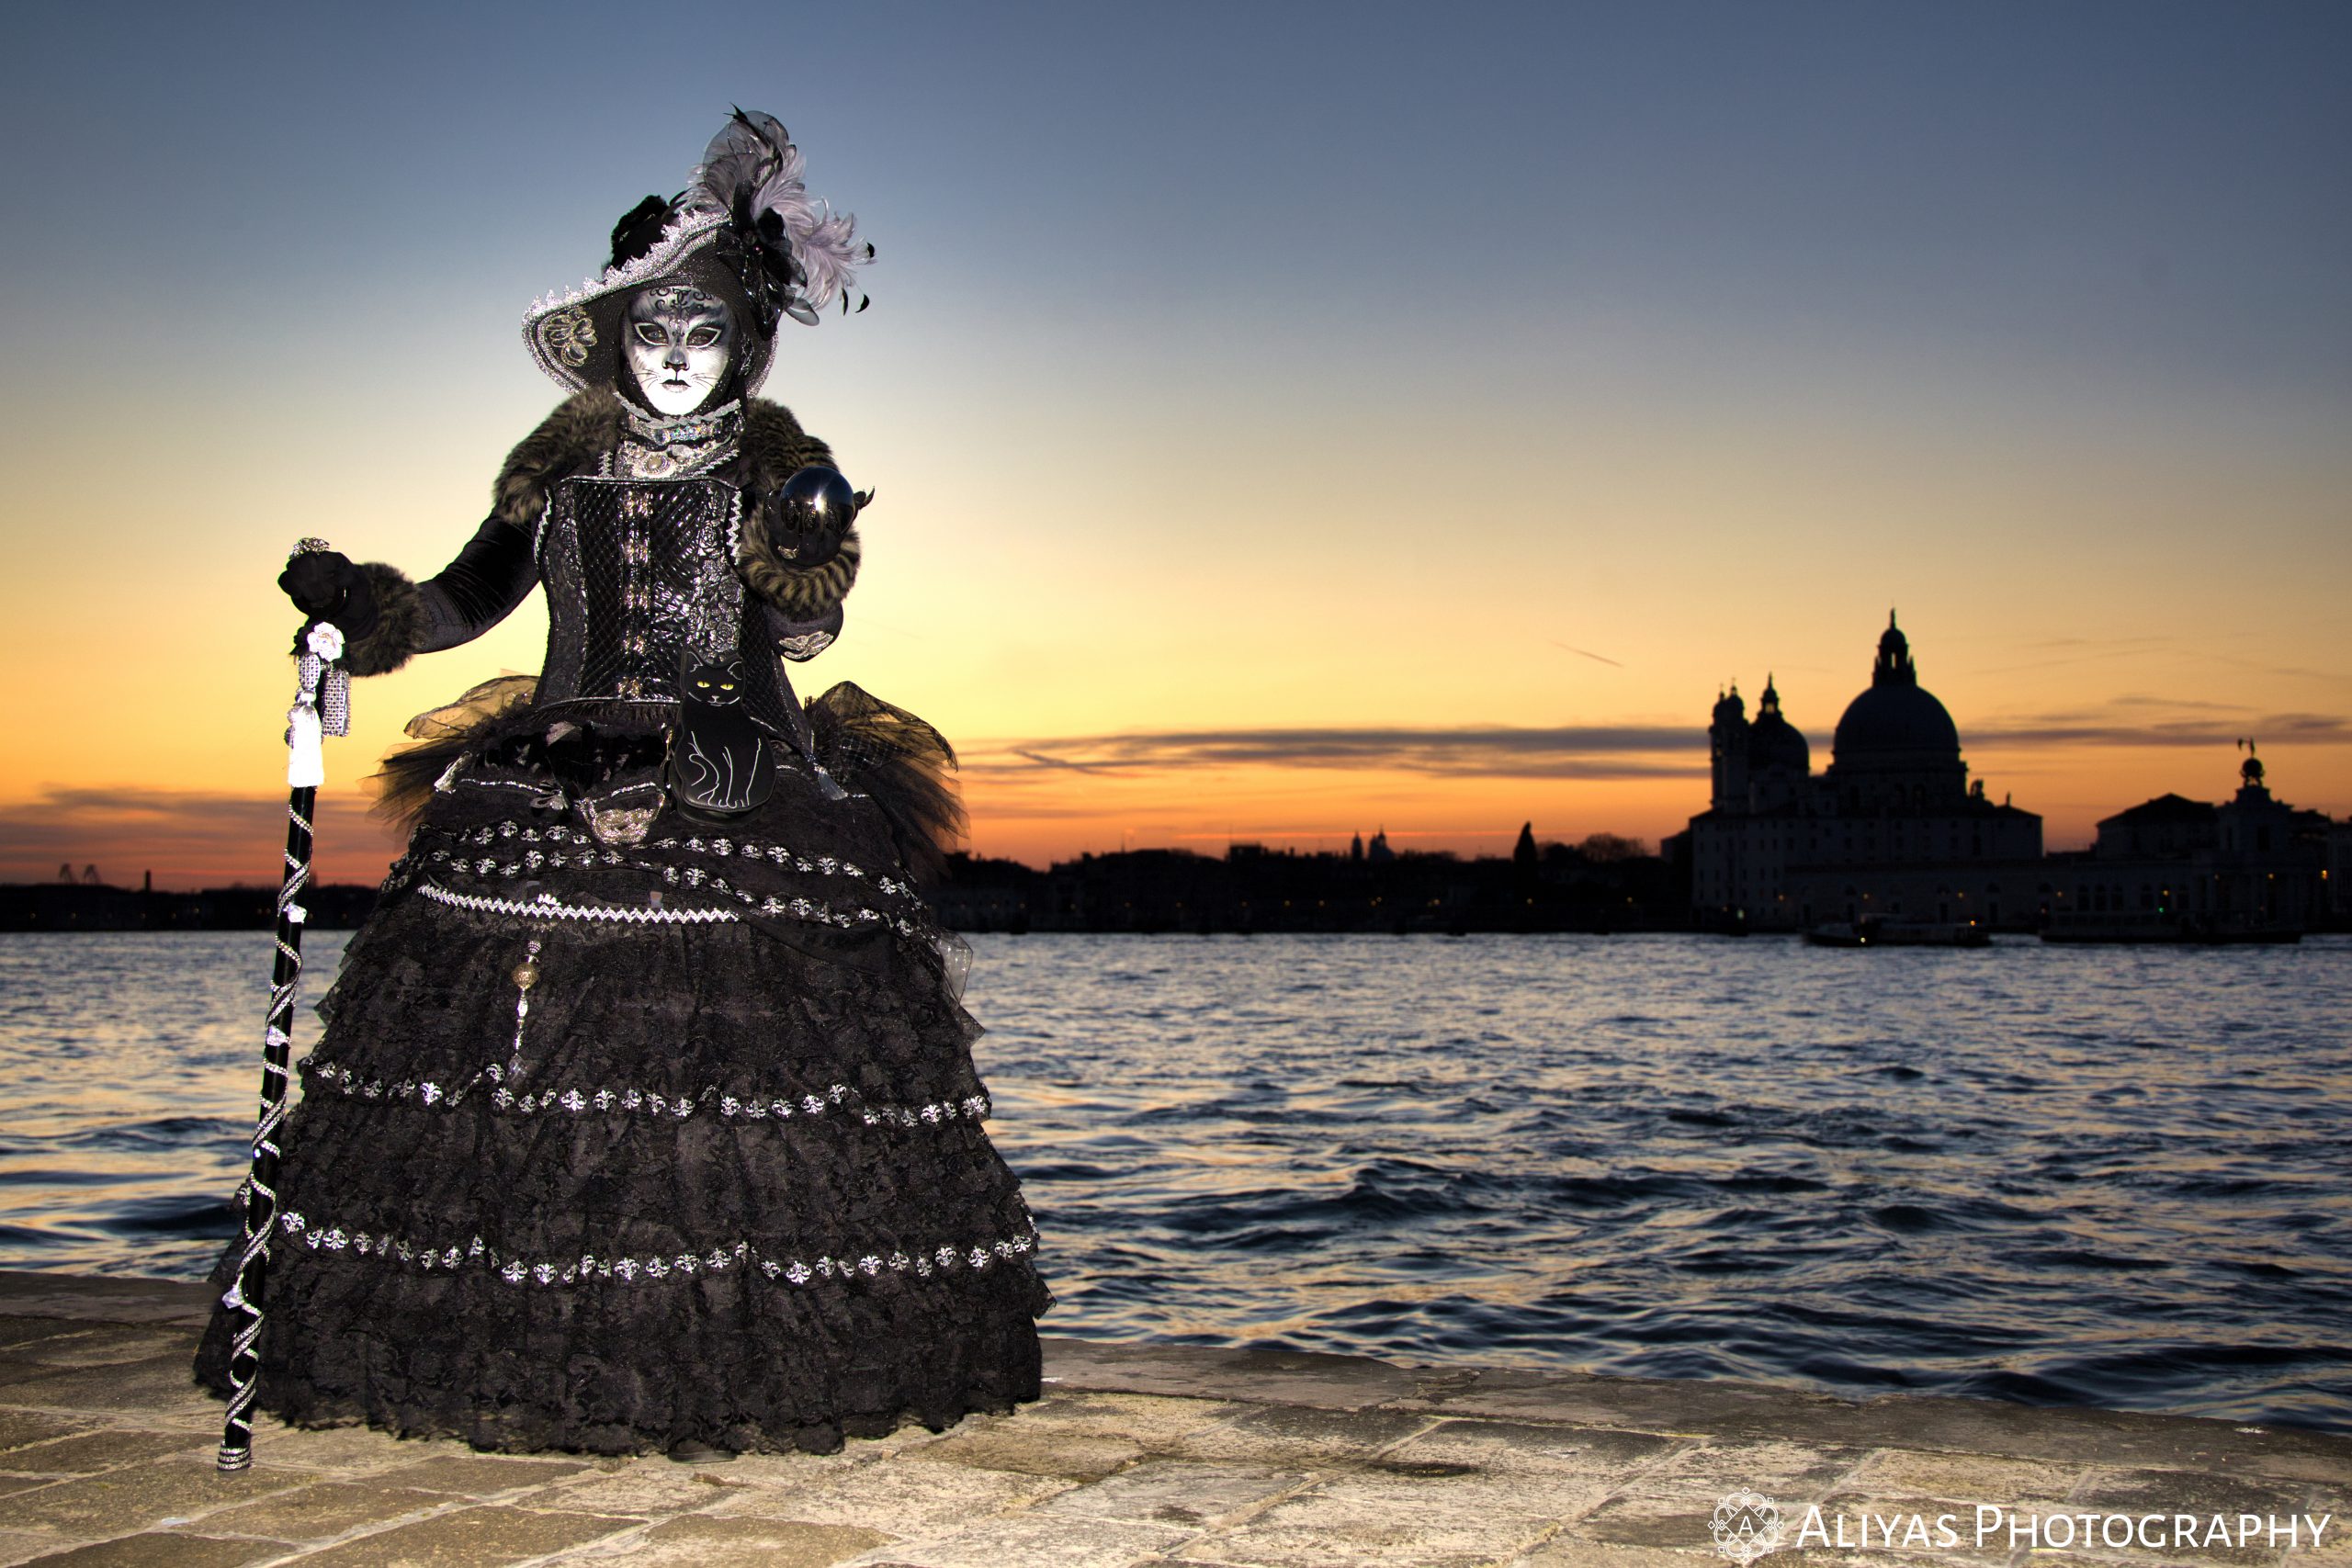 On this picture, you can see a woman wearing a black and silver costume in the Carnival of Venice in 2020. She wears a black and white cat mask. Her accessory is a black/silver stick.